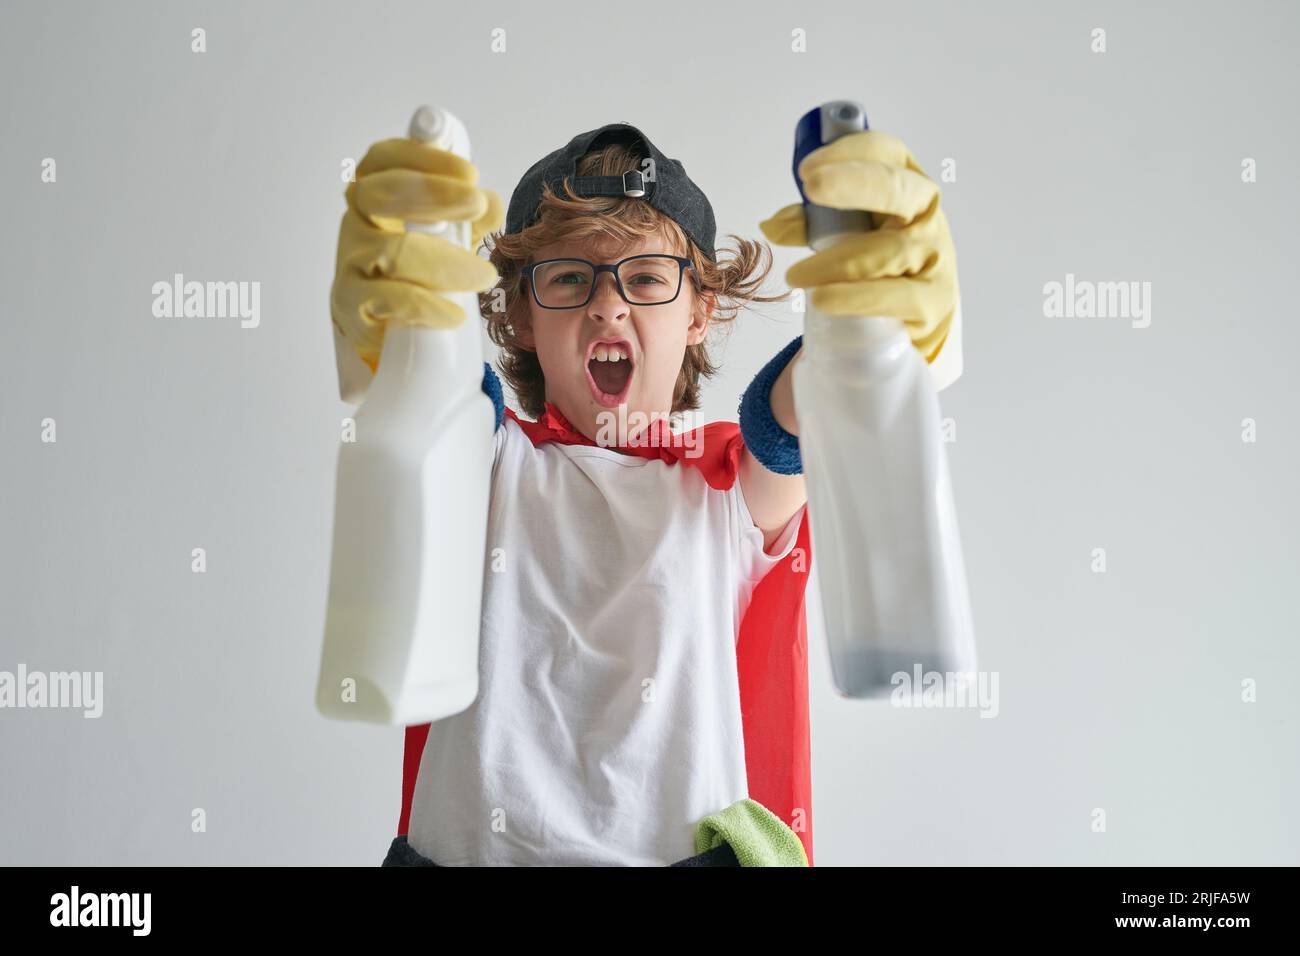 Funny preteen boy showing white plastic detergent bottles with hands in yellow gloves while looking at camera and screaming loudly with opened mouth d Stock Photo